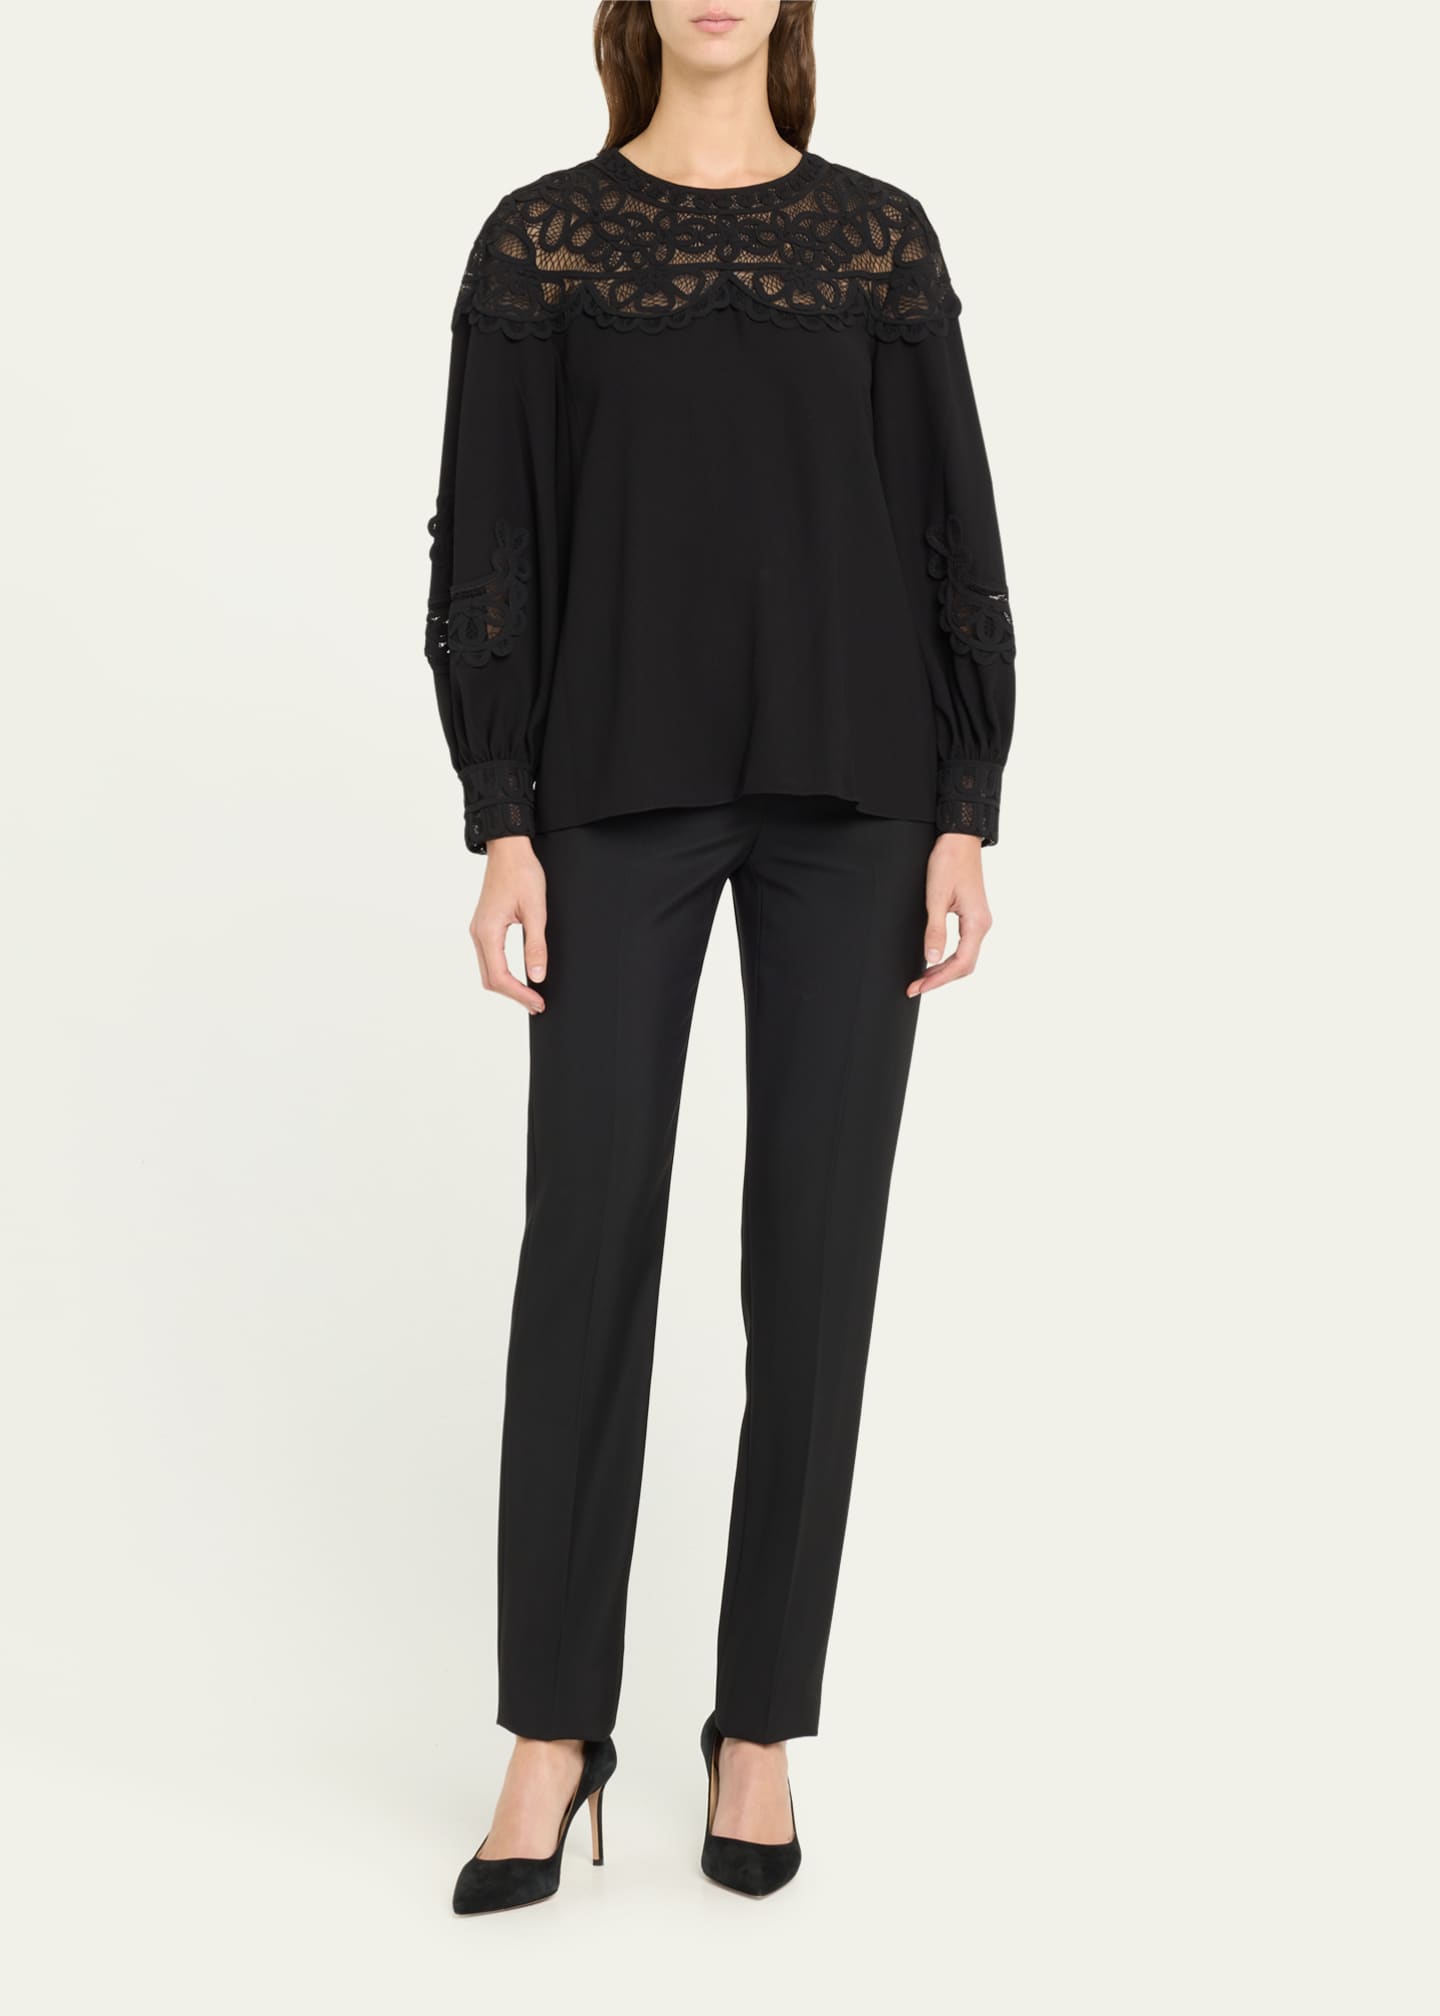 Carolina Herrera Embroidered Puff-Sleeve Top with Lace Panels ...